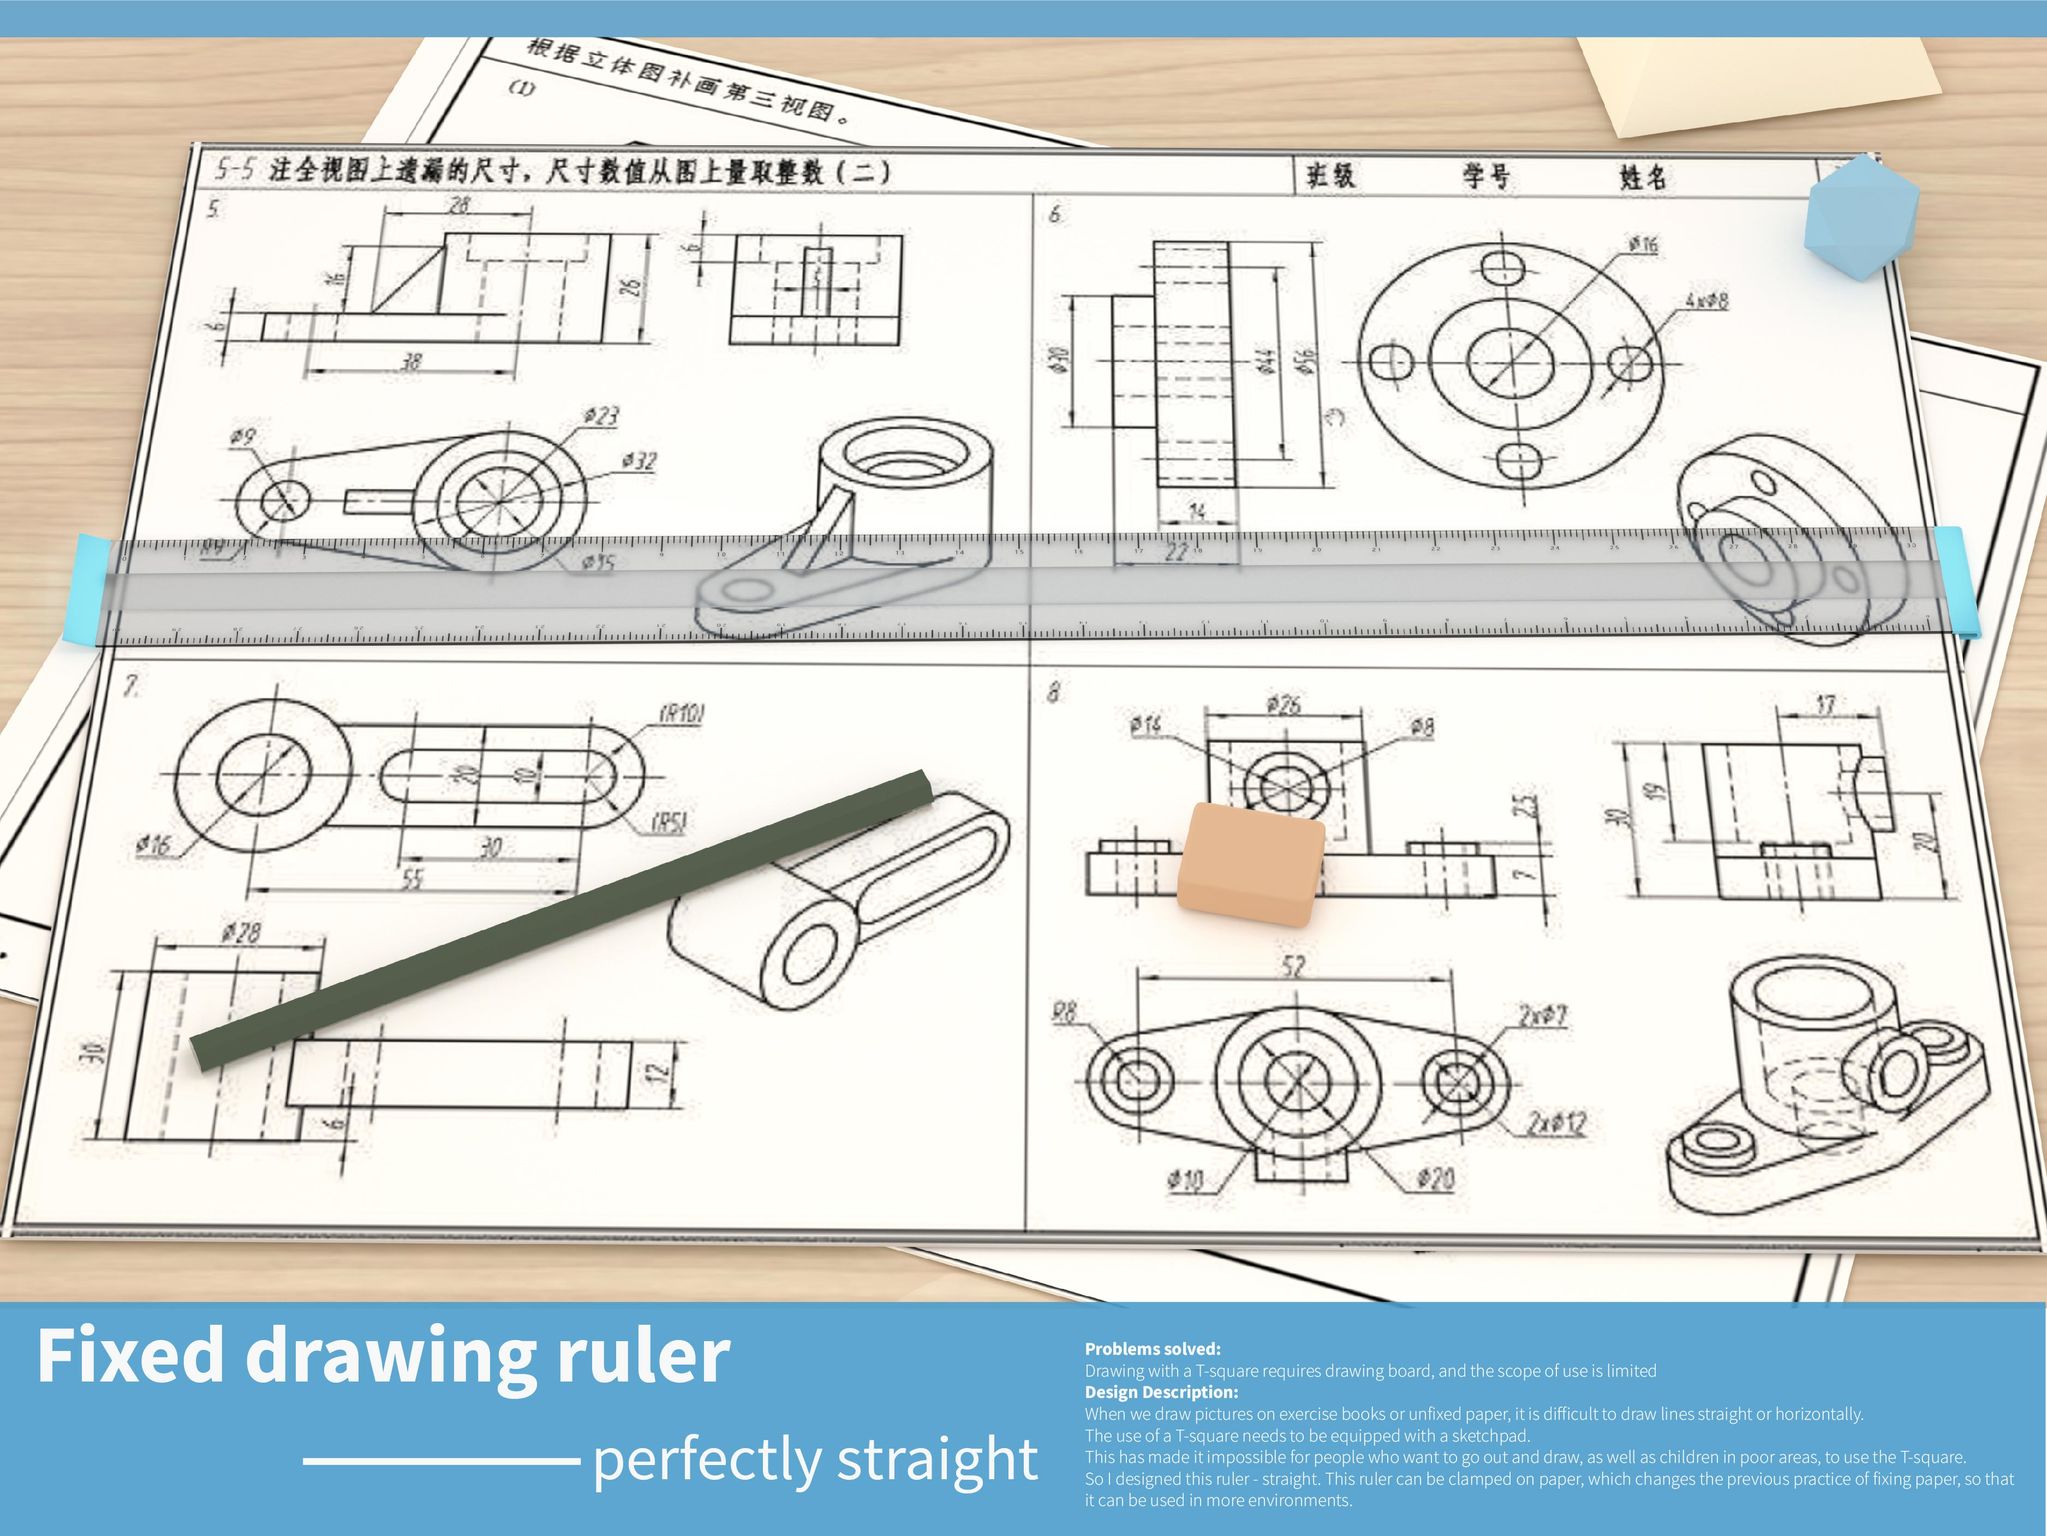 Fixed drawing ruler iF WORLD DESIGN GUIDE